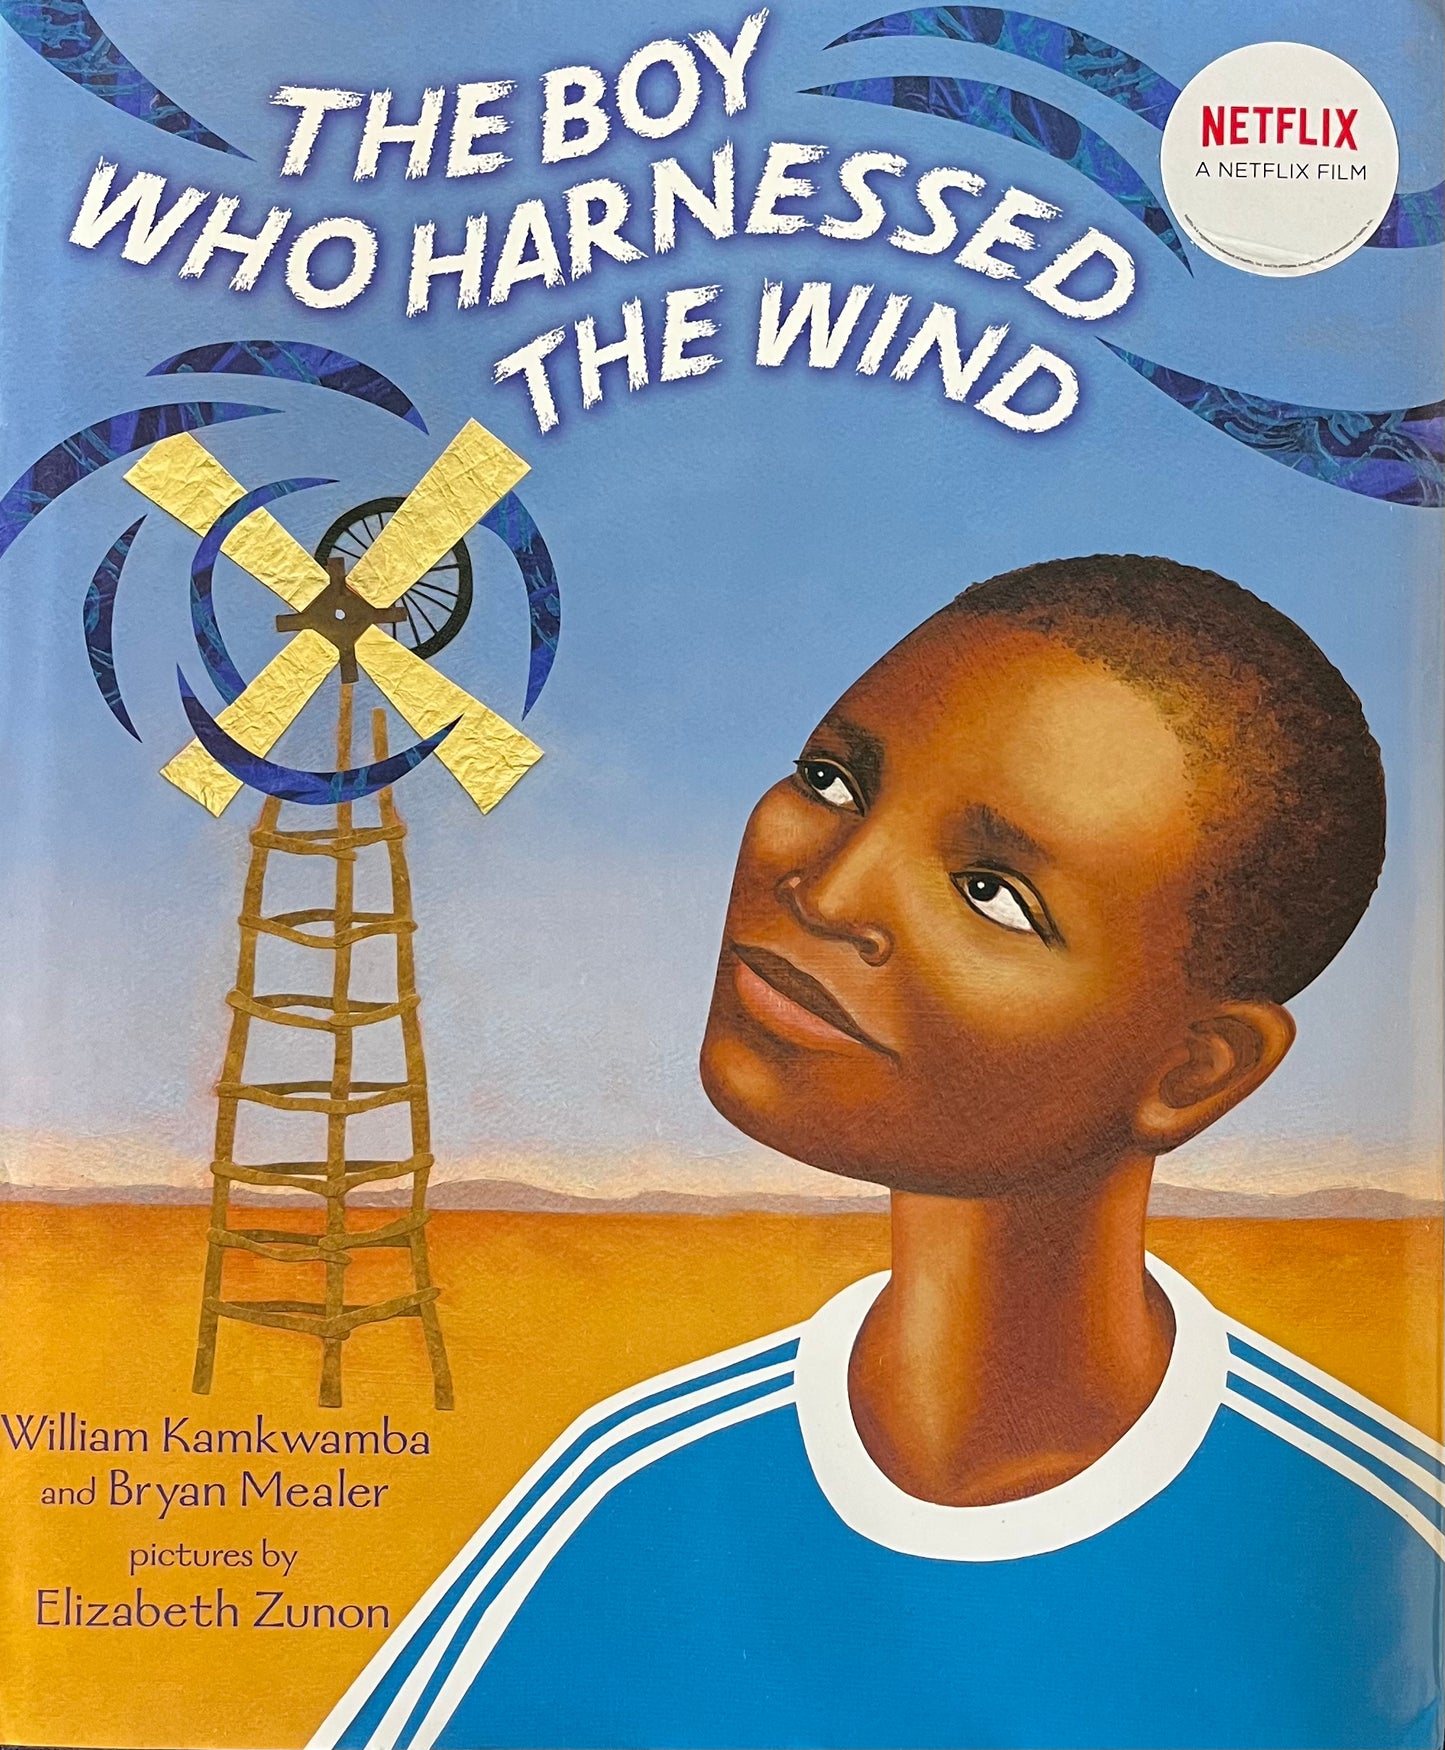 THE BOY WHO HARNESSED THE WIND By William Kamkwamba